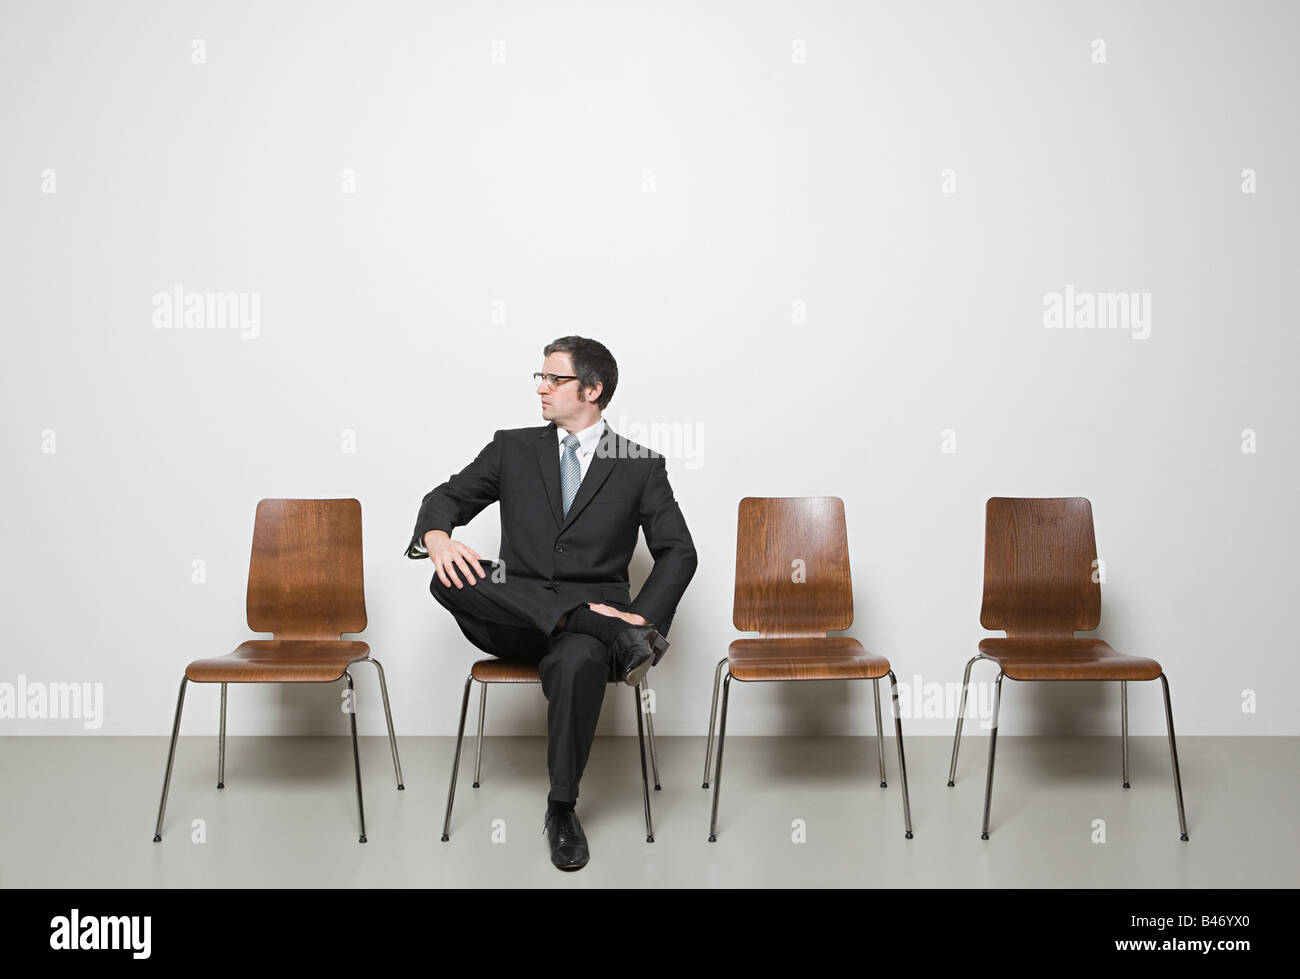 Businessman sitting in chair Stock Photo